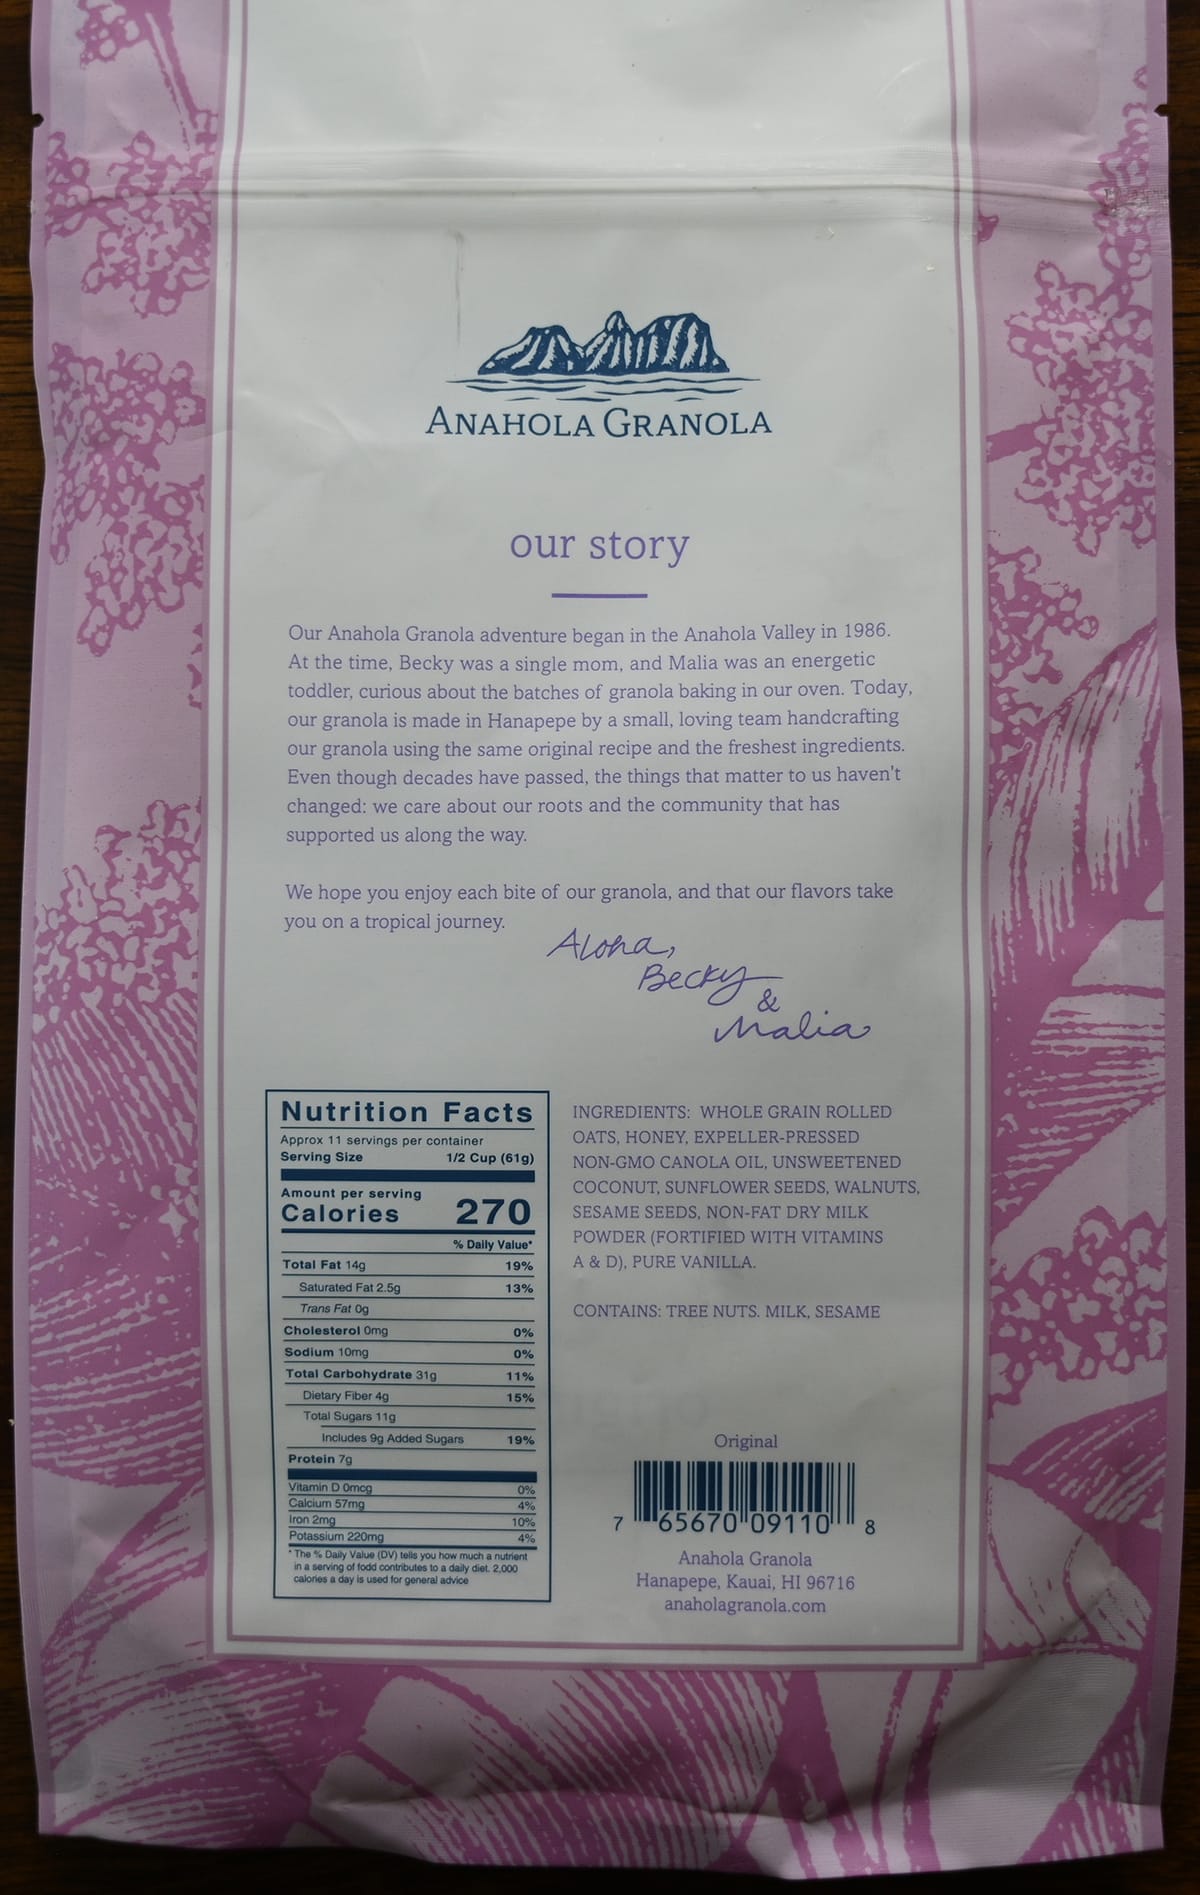 Closeup image of the back of the bag of granola showing company description, ingredients and nutrition facts.